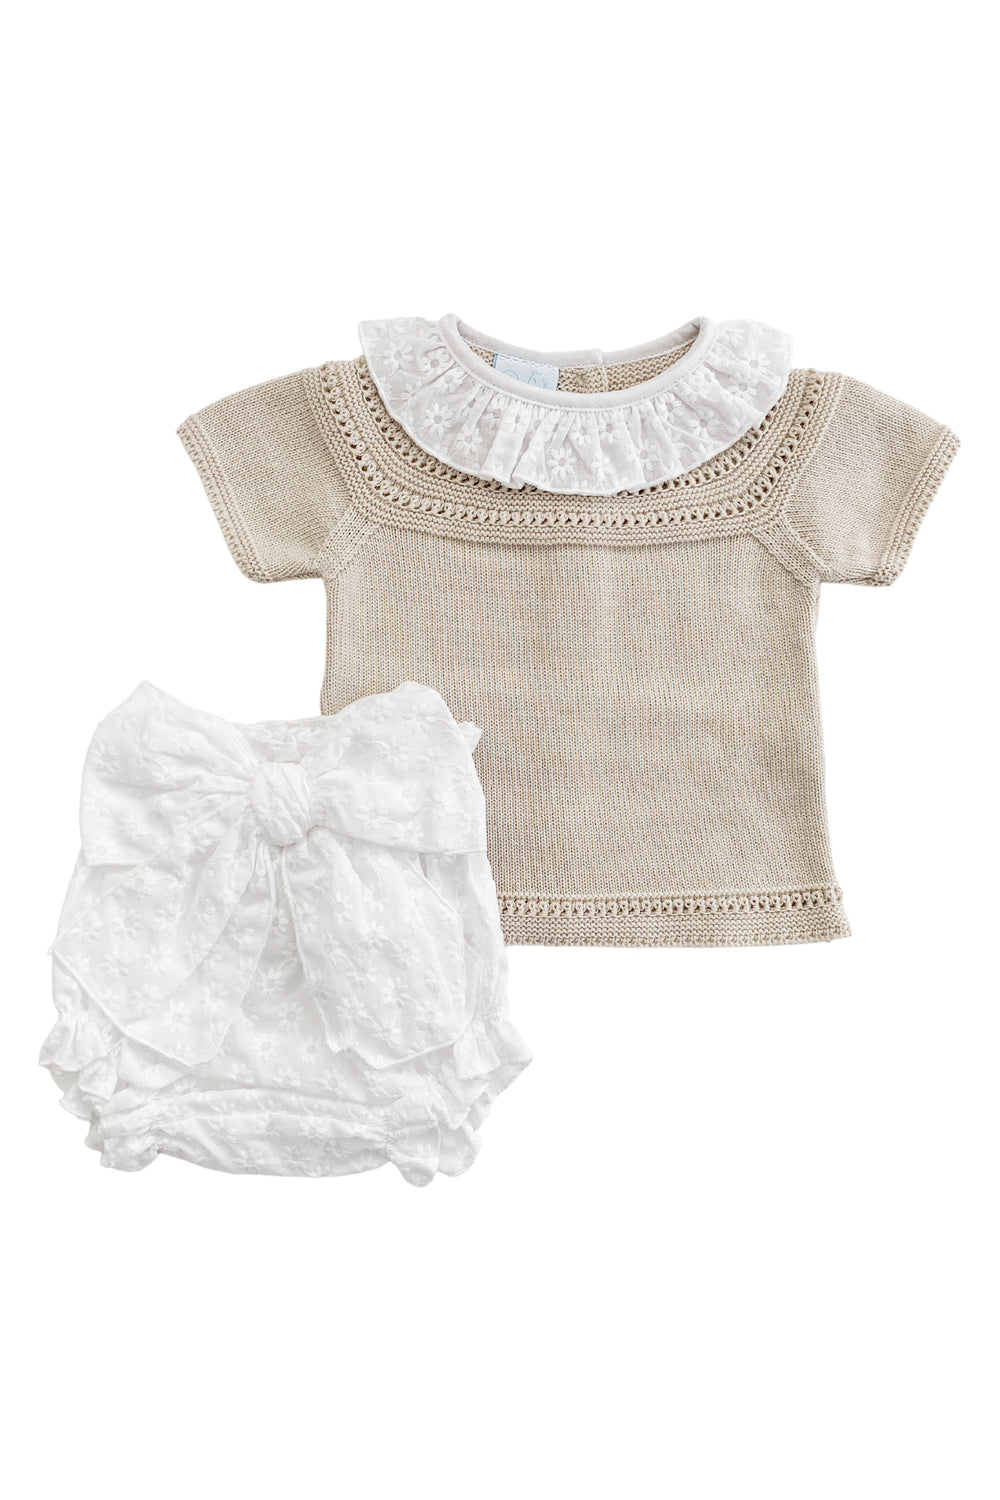 Granlei "Indie" Stone Knit Top & White Bow Bloomers | Millie and John